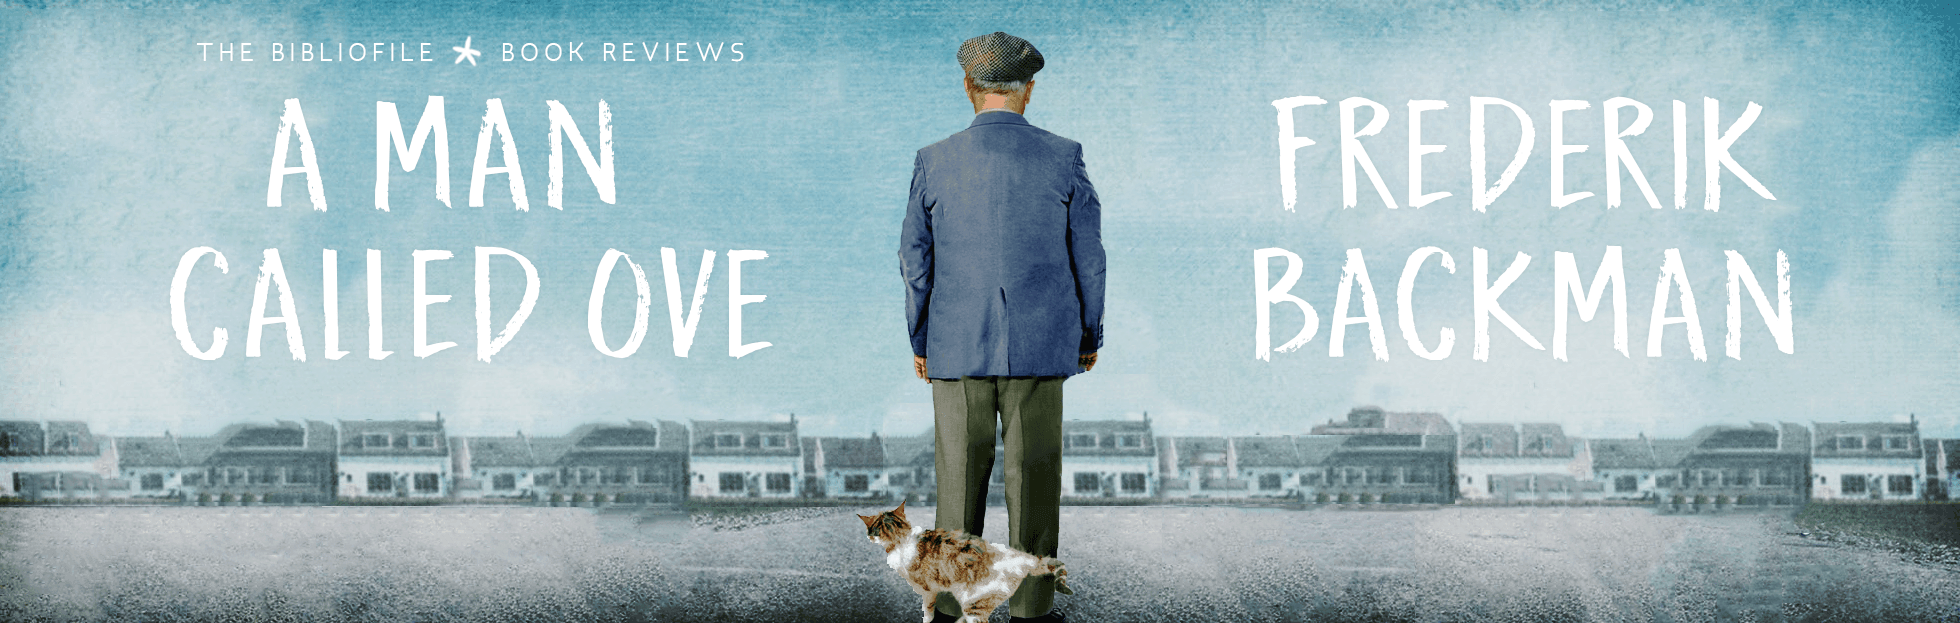 a man called ove by frederik backman